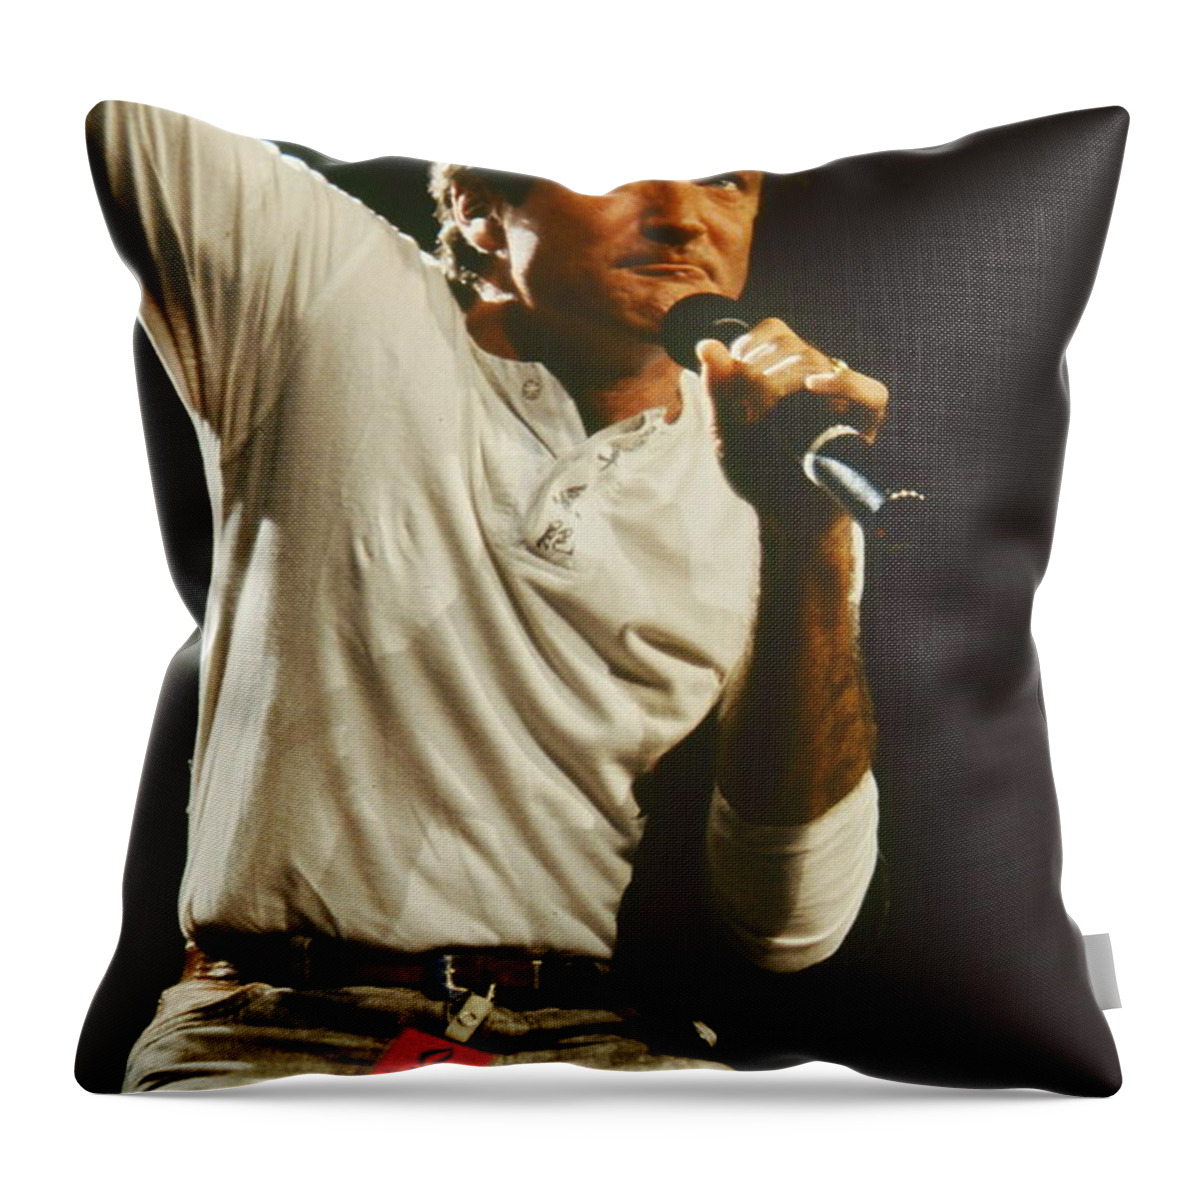 Robin Williams Throw Pillow featuring the photograph Robin Williams by David Plastik